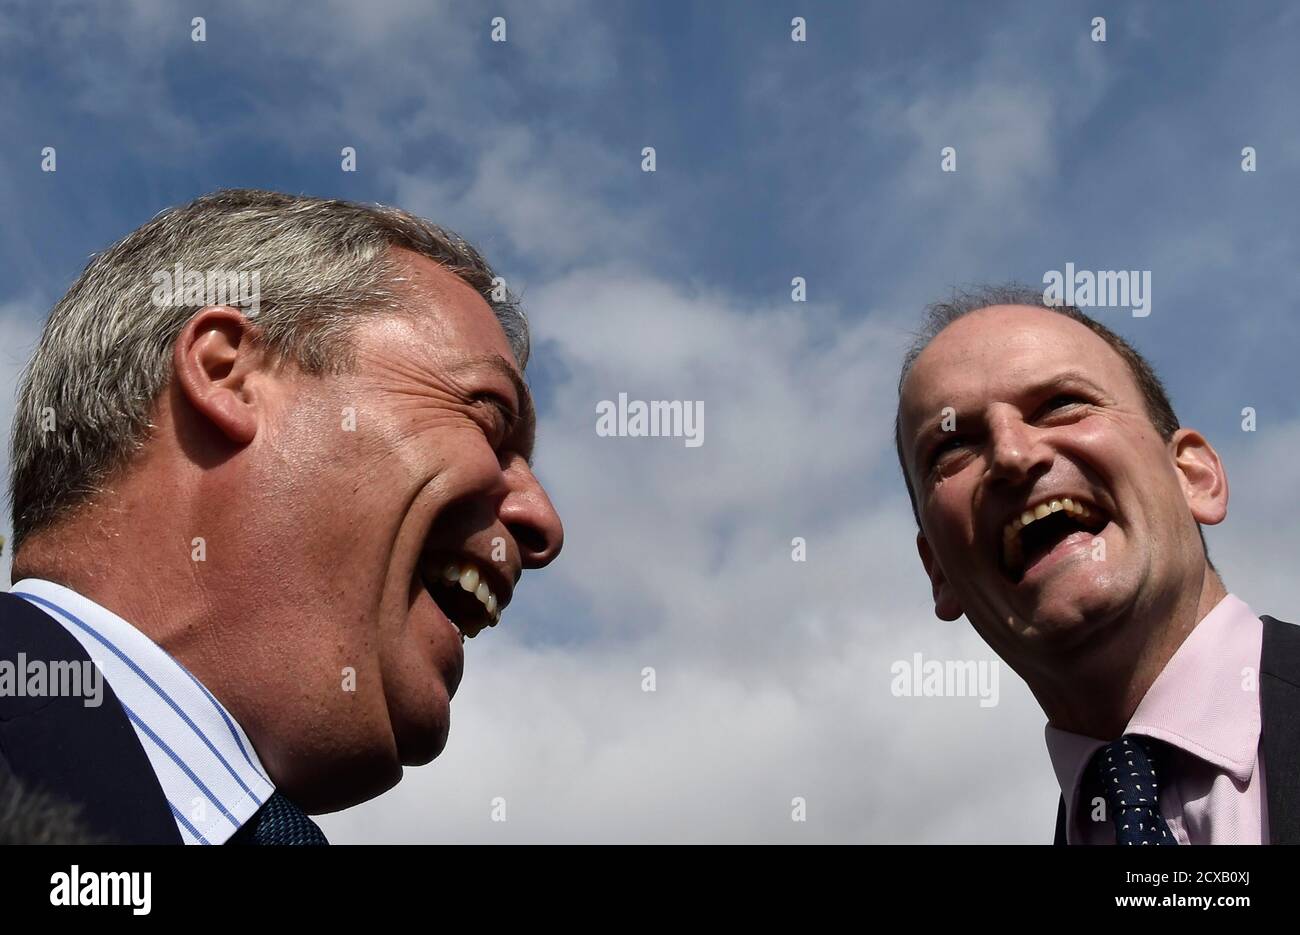 Member of Parliament (MP) Douglas Carswell (R) and Nigel Farage, the leader of Britain's UK Independence Party (UKIP) party, laugh as they walk through the town centre of Clacton-on-Sea in south east England August 29, 2014. British Prime Minister David Cameron suffered a setback on Thursday when a lawmaker from his ruling Conservative party unexpectedly resigned and defected to the anti-EU UKIP party which has no seats in the British parliament. The defection of Douglas Carswell comes eight months before a national election in which UKIP threatens Cameron's re-election chances.   REUTERS/Toby Stock Photo